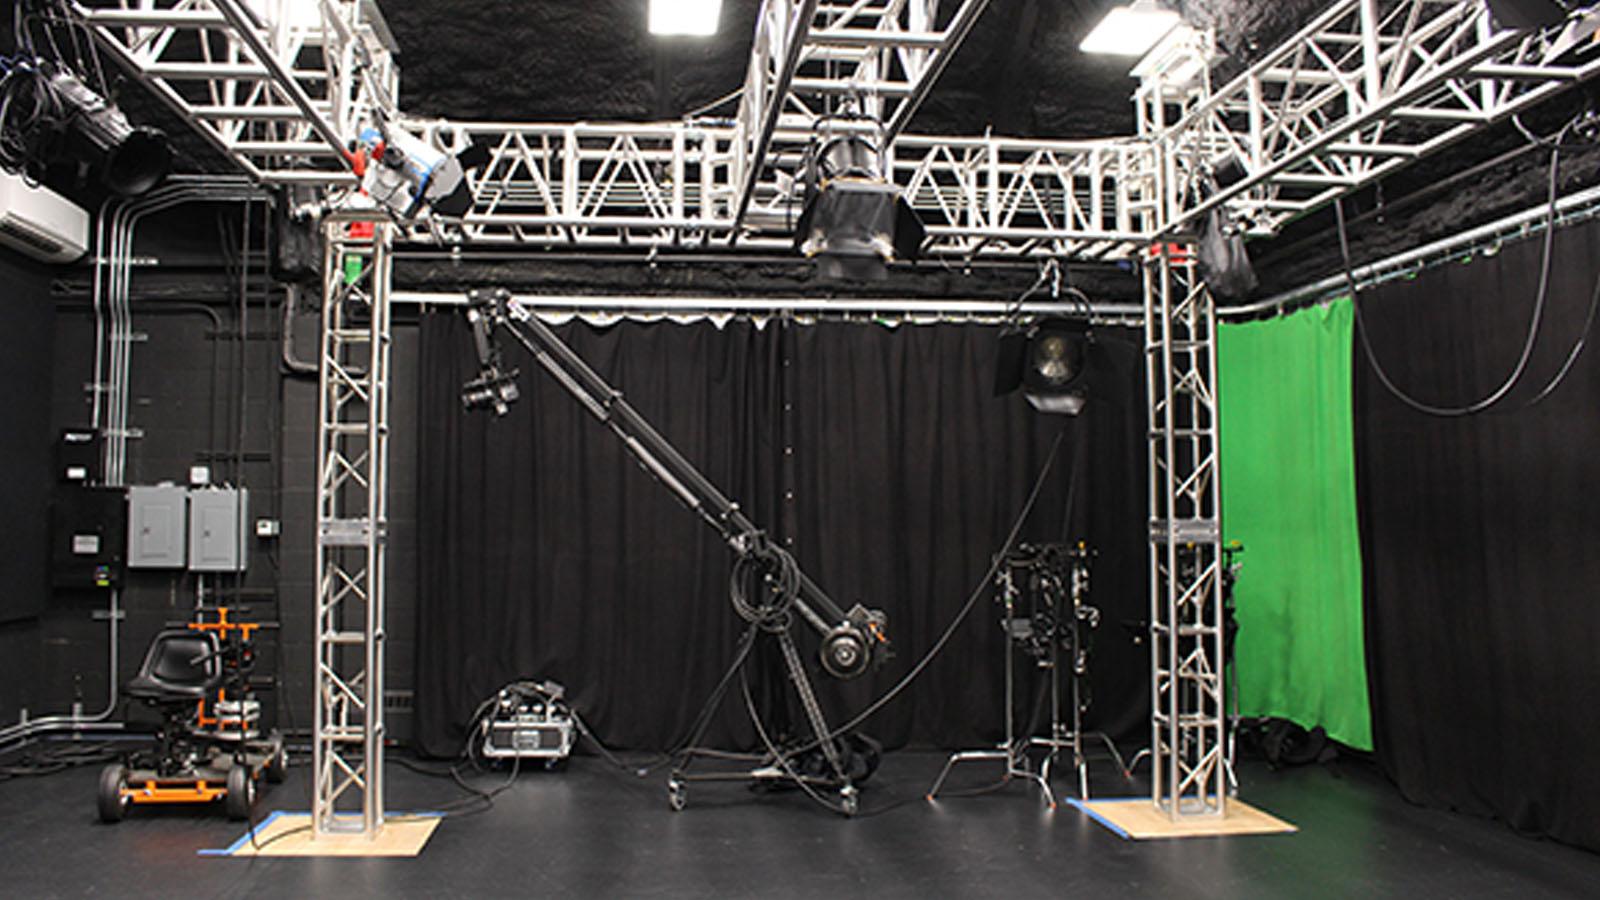 A large production stage with a boom mic, gimble, stage lights, and greenscreen